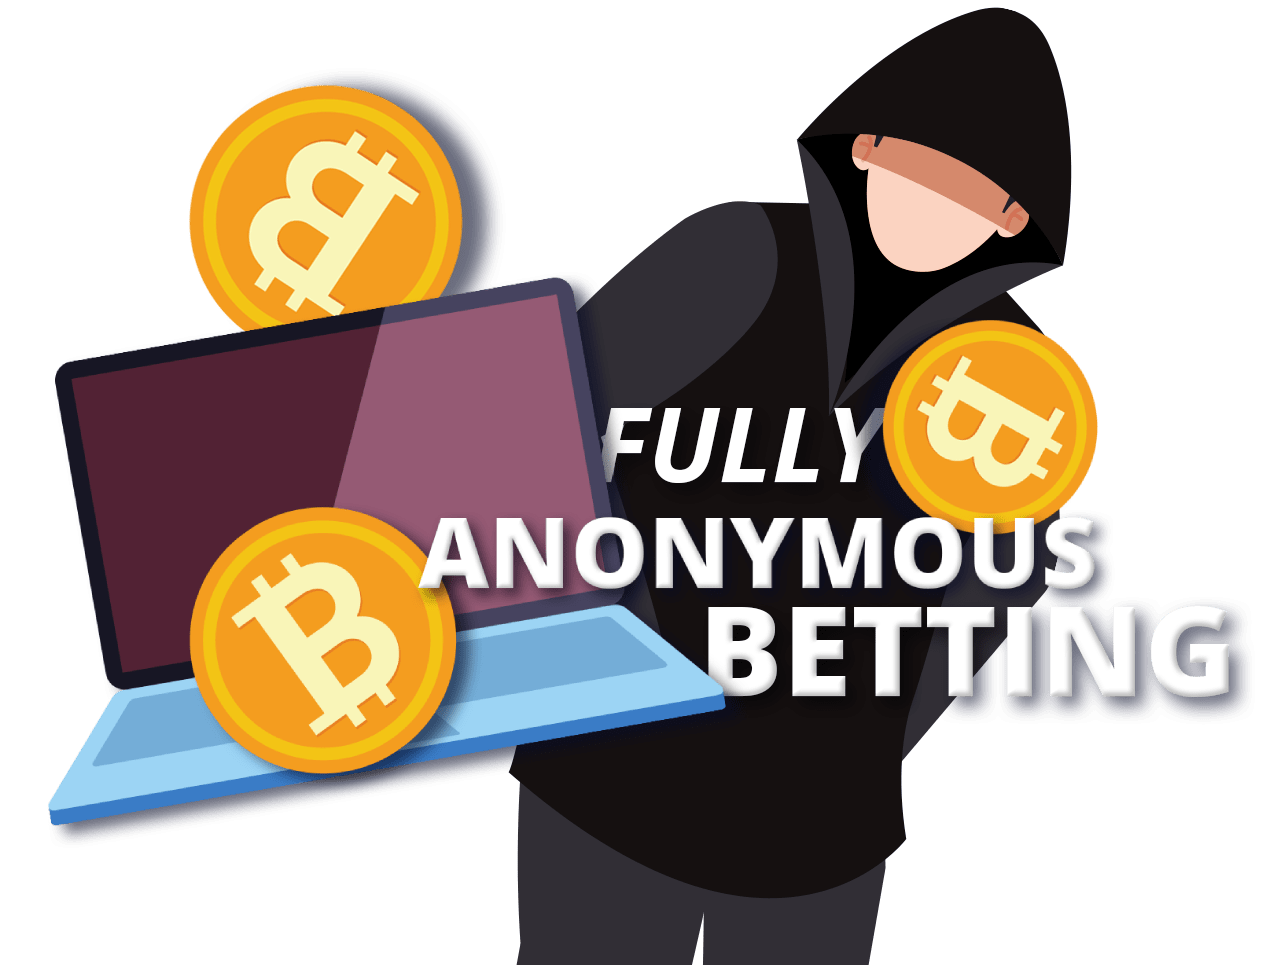 Fully anonymous betting